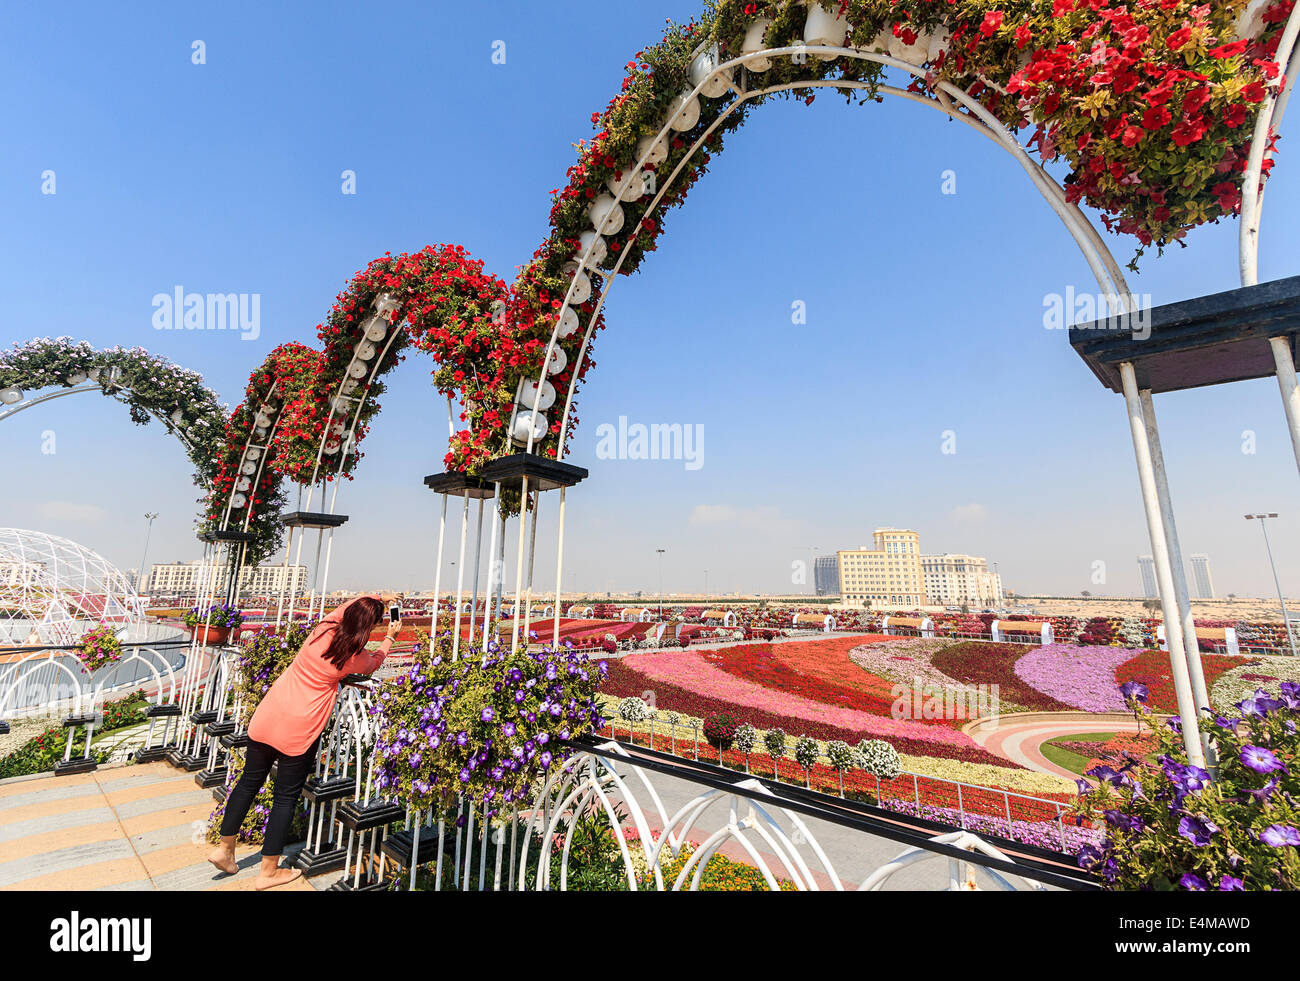 Woman visitor photographs valley covered in flowers at Dubai's Miracle Garden, largest natural flower garden in the world Stock Photo